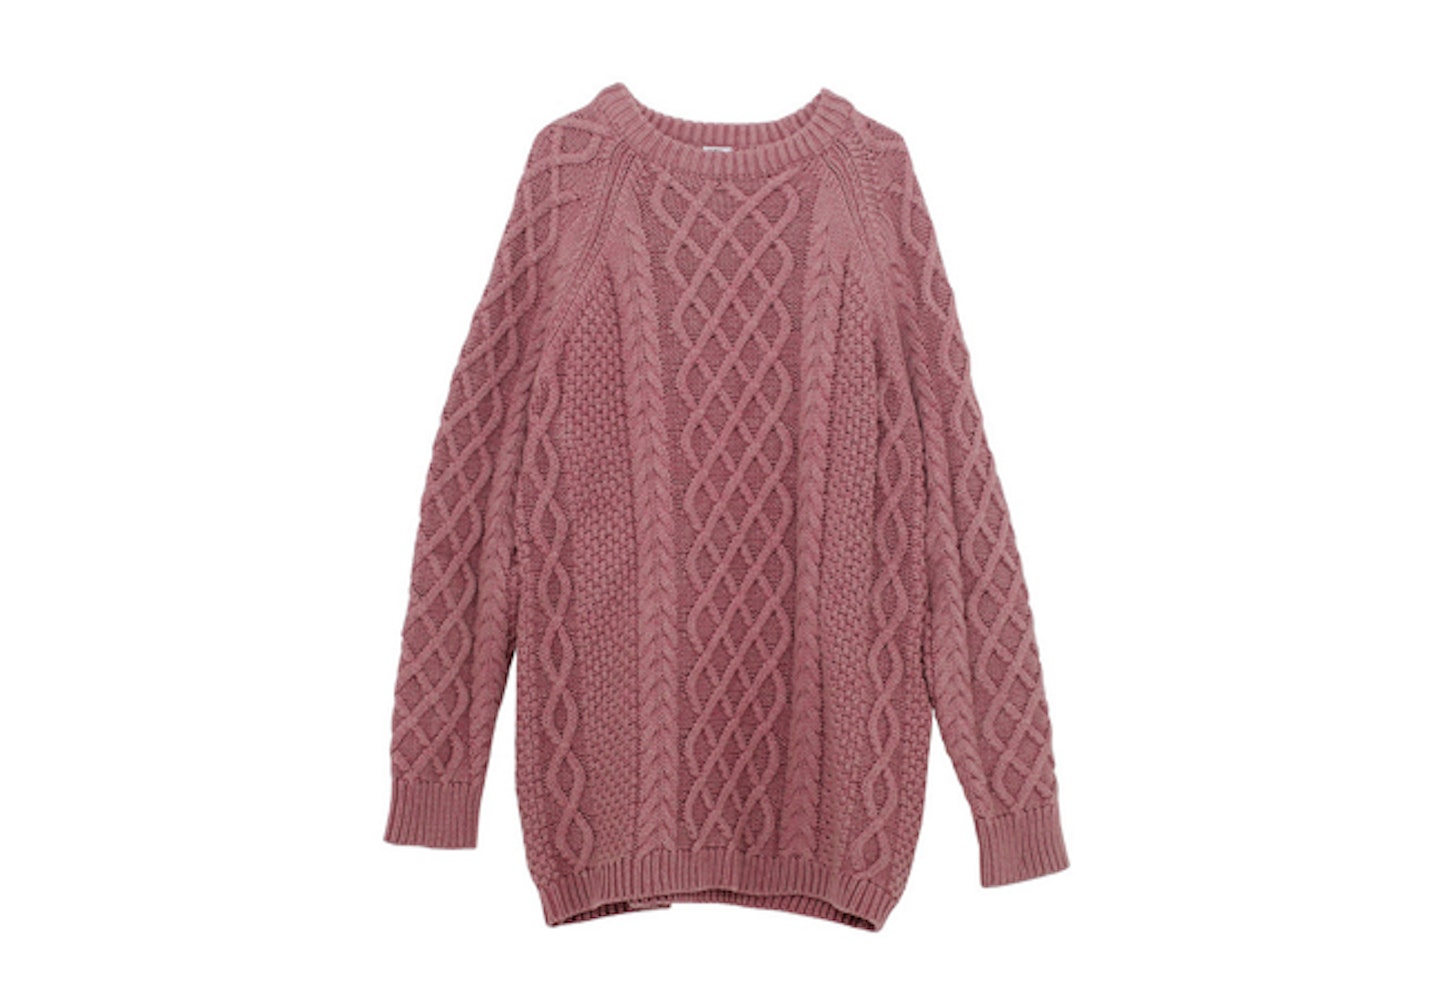 Oversized Knit Jumper Dusty Pink, £30, <a title="thewhitepepper.com" href="http://www.thewhitepepper.com/products/oversized-knit-jumper-dusky-pink" target="_blank">thewhitepepper.com</a>